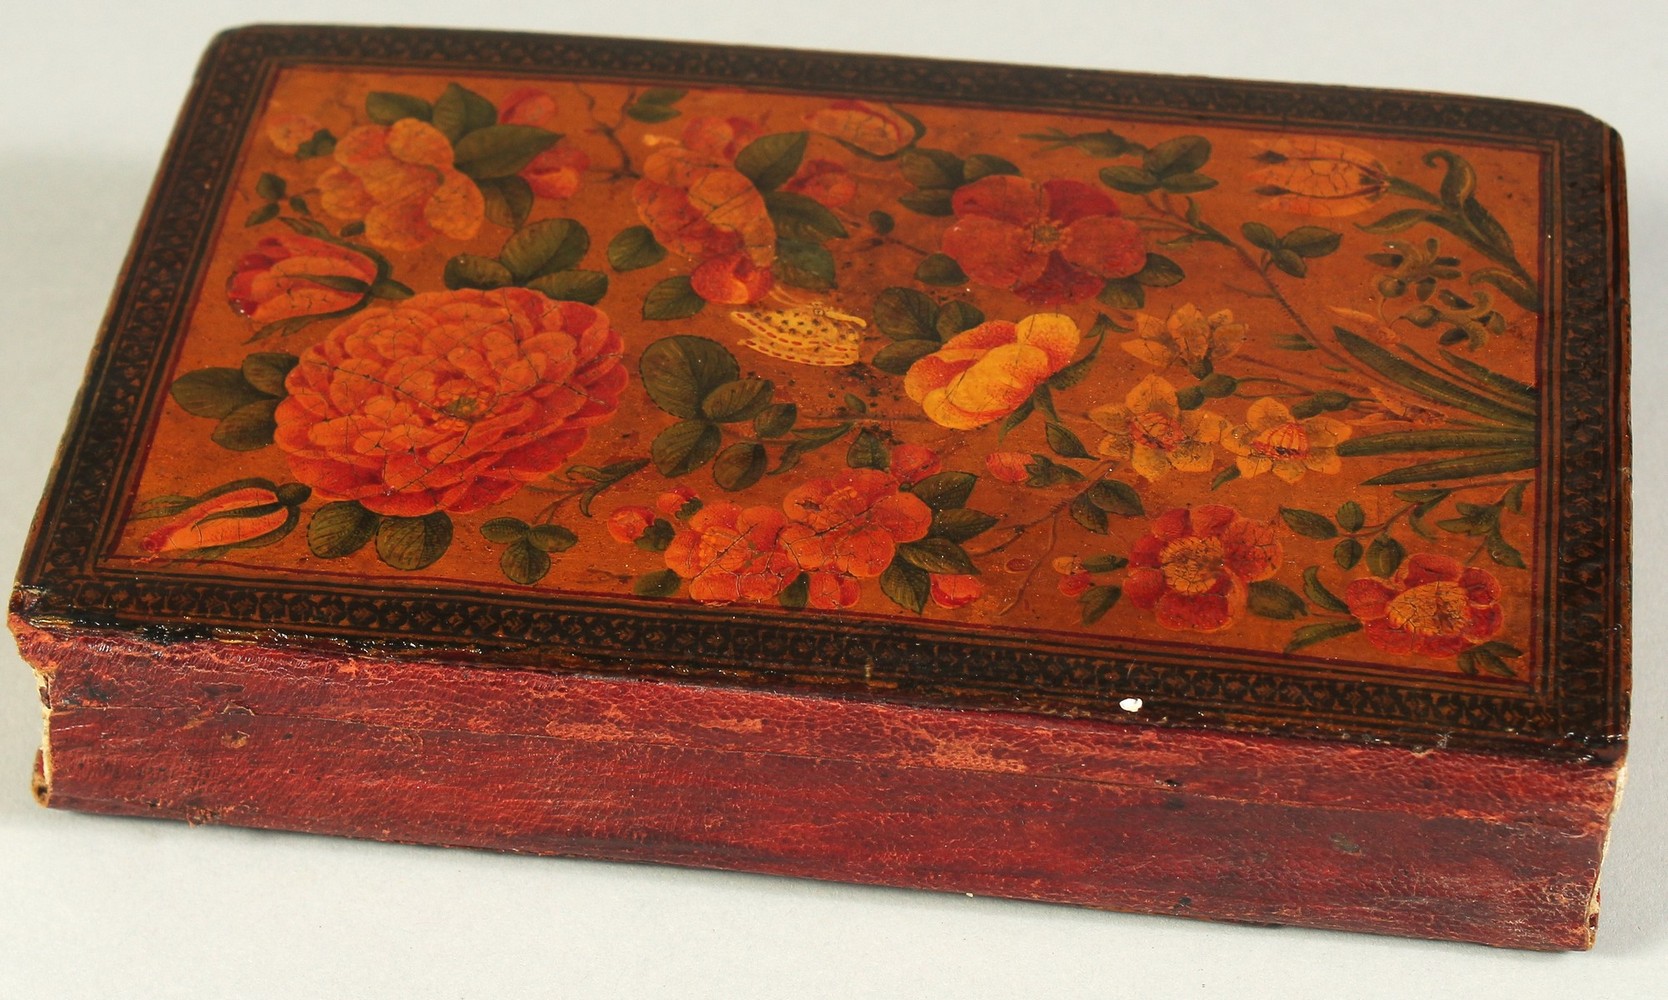 A FINE PERSIAN QAJAR LACQUERED COVER QURAN, signed and dated, the covers painted with flora, 15cm - Image 7 of 7